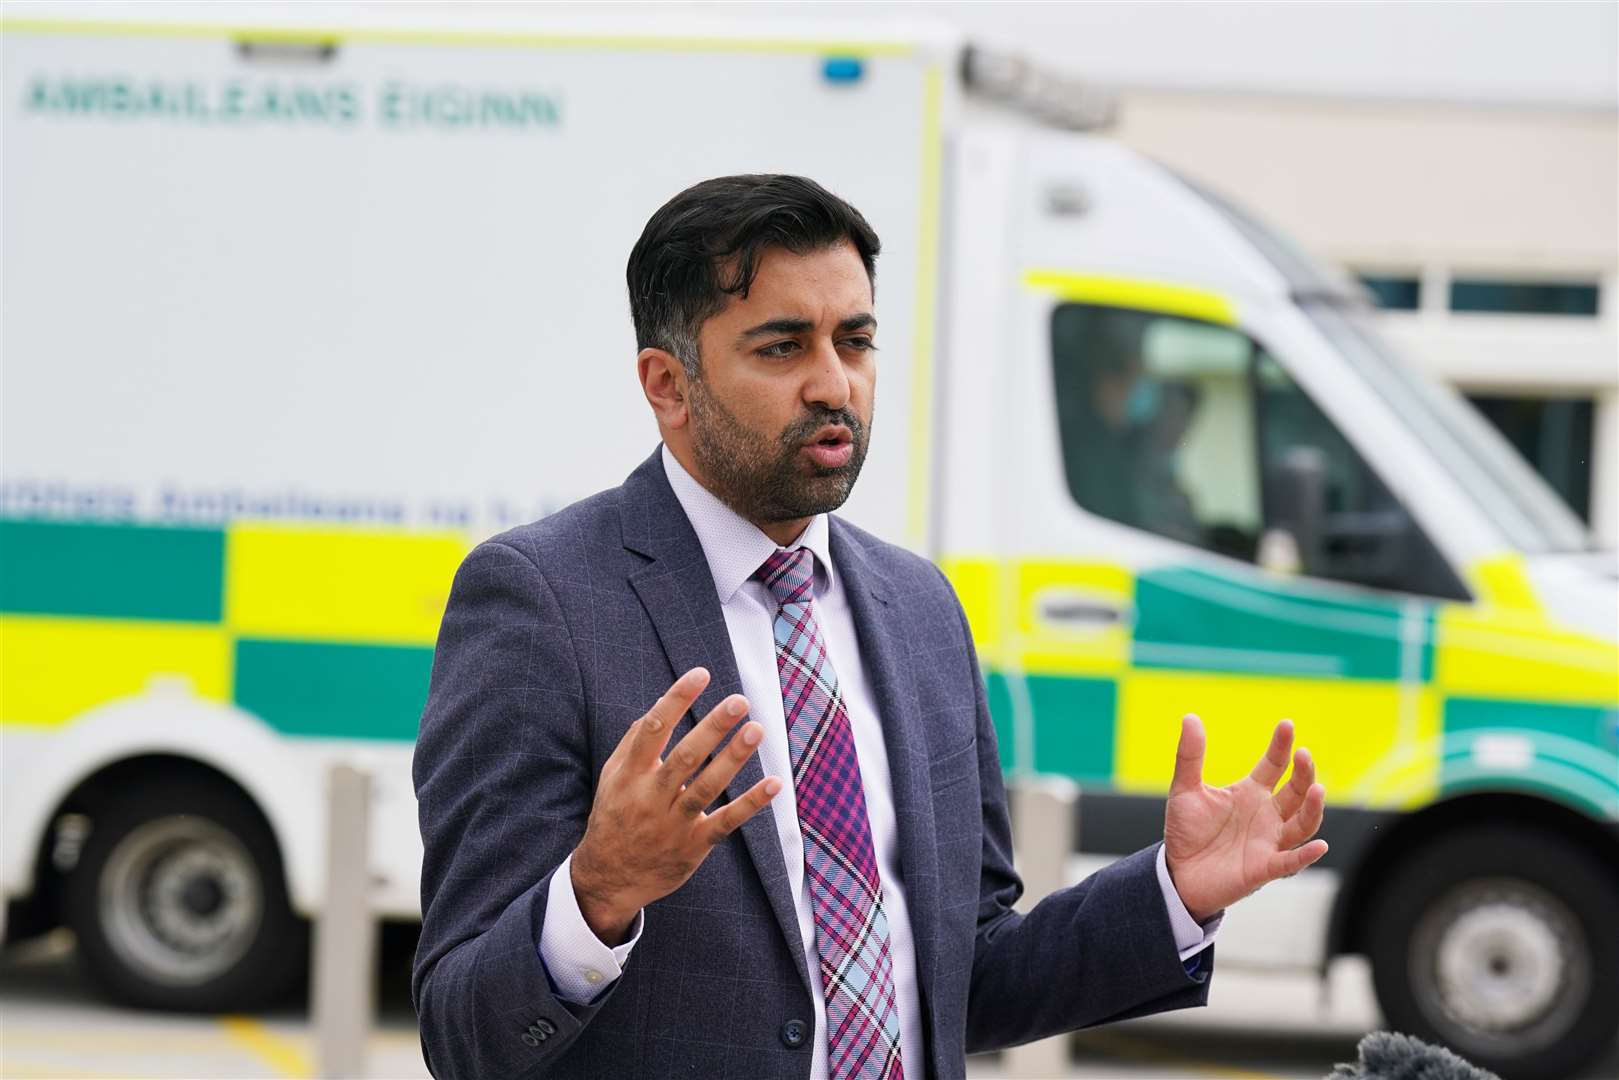 Humza Yousaf mentioned the public health impact of the bin strike (Andrew Milligan/PA)